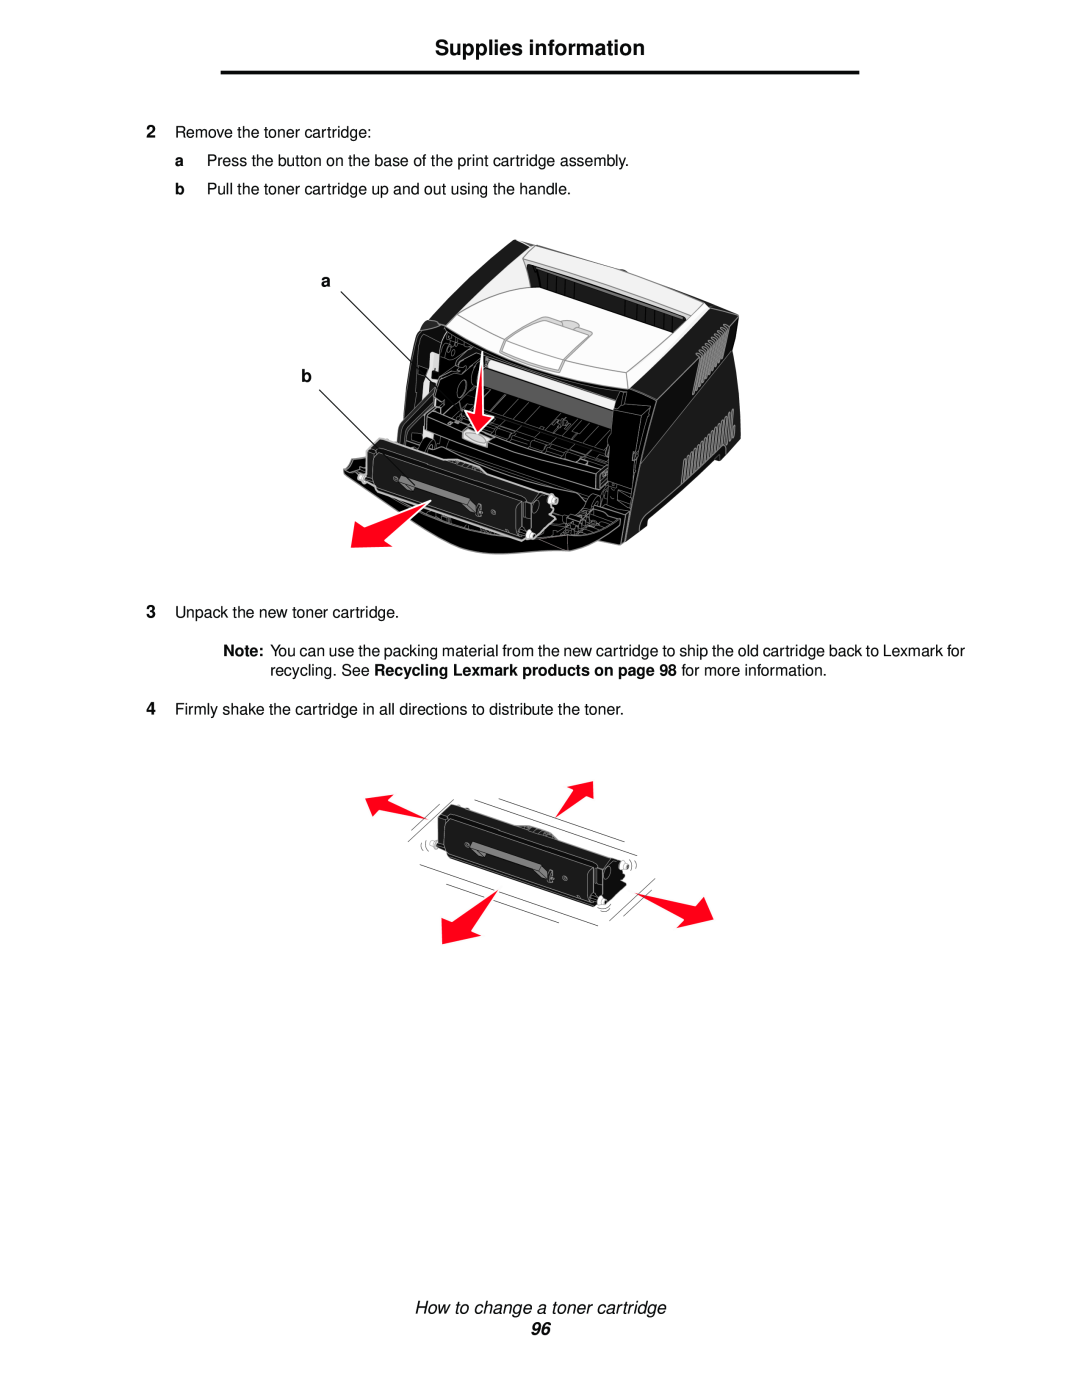 Lexmark 342n, 340 manual Supplies information, How to change a toner cartridge 